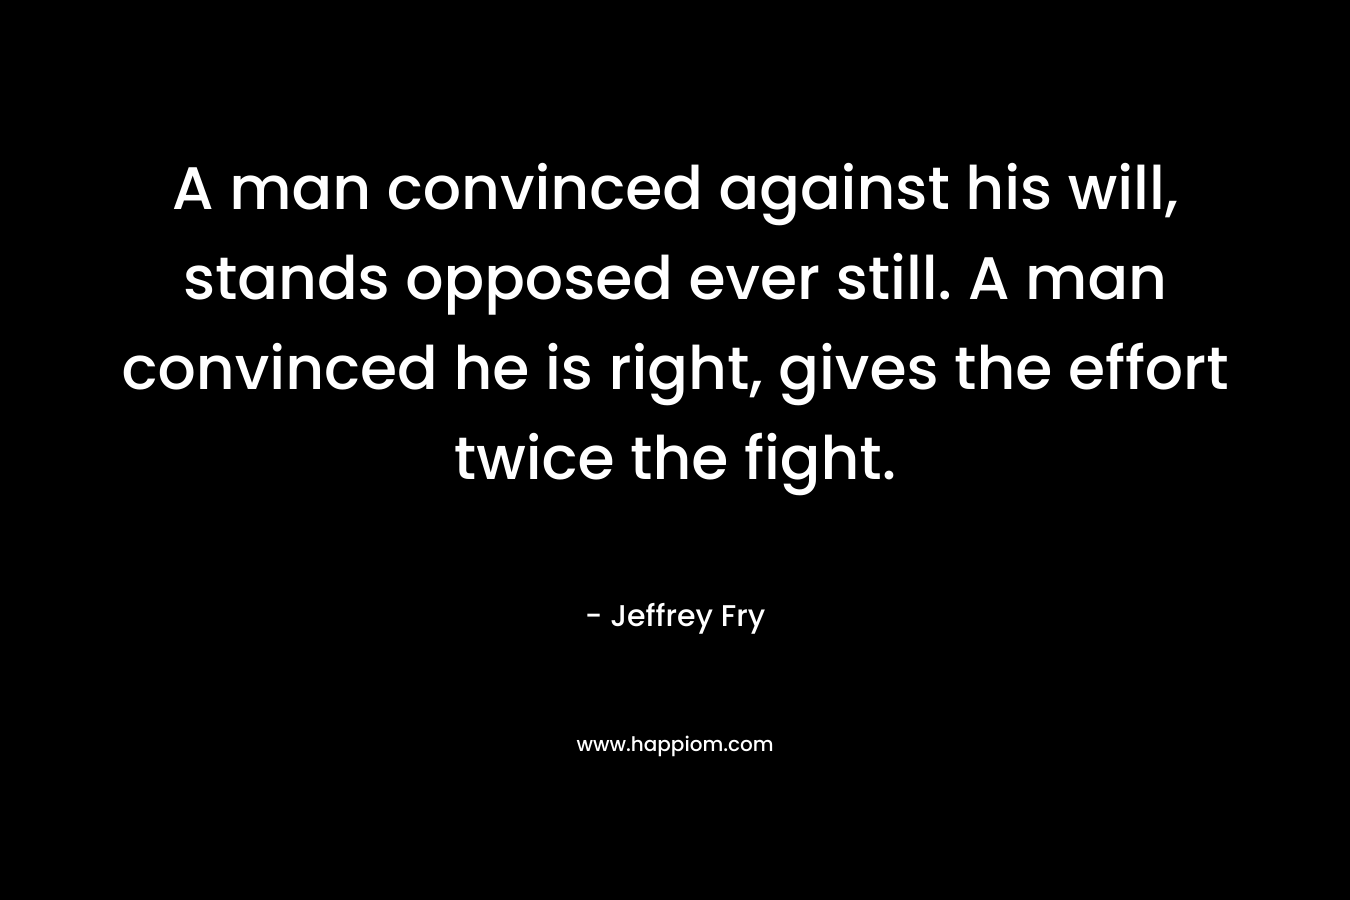 A man convinced against his will, stands opposed ever still. A man convinced he is right, gives the effort twice the fight.